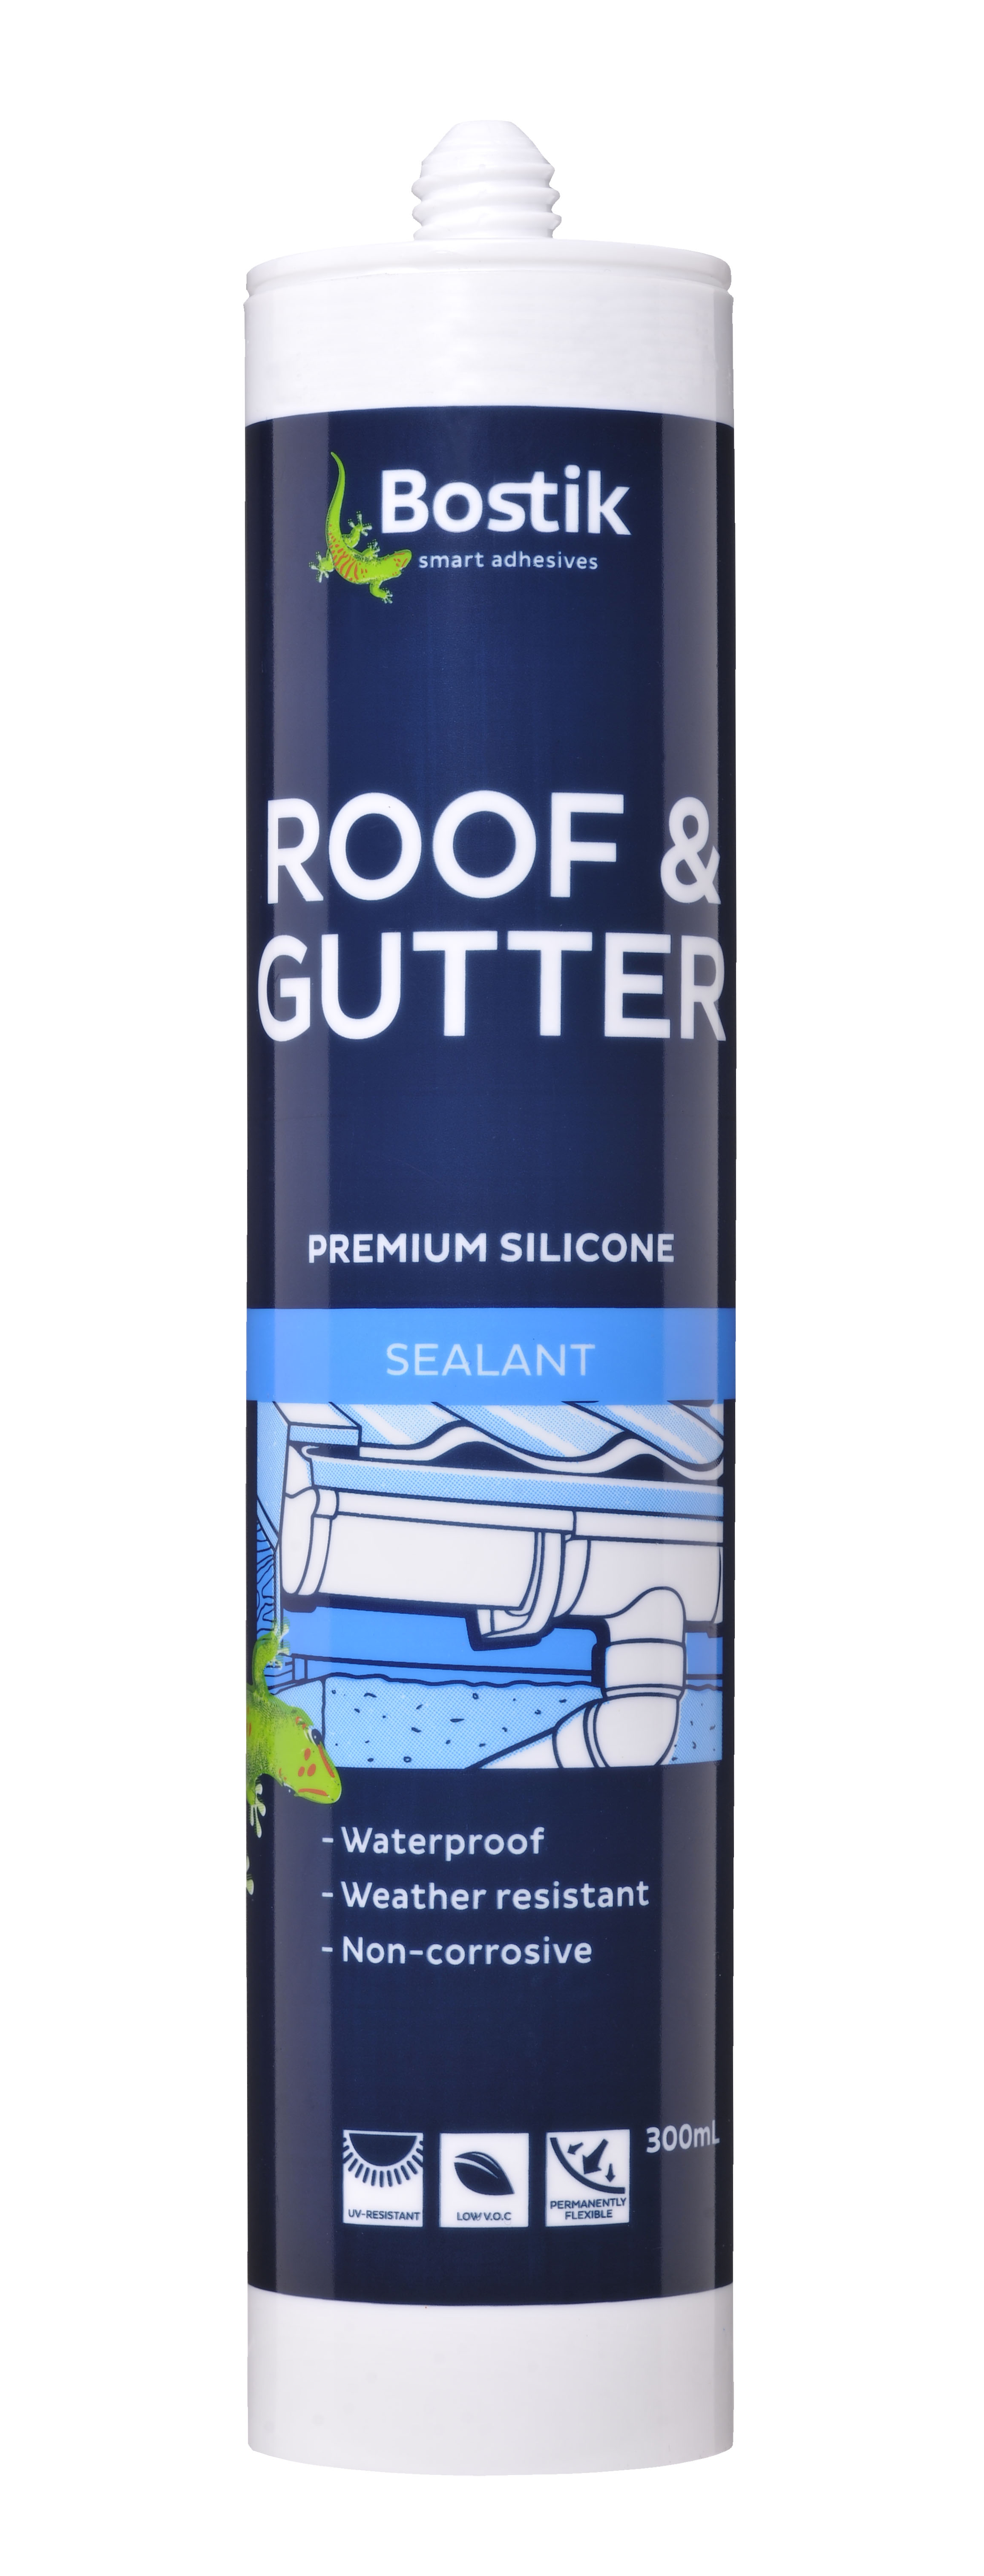 BOSTIK ROOF & GUTTER SILICONE MONUMENT 300G 